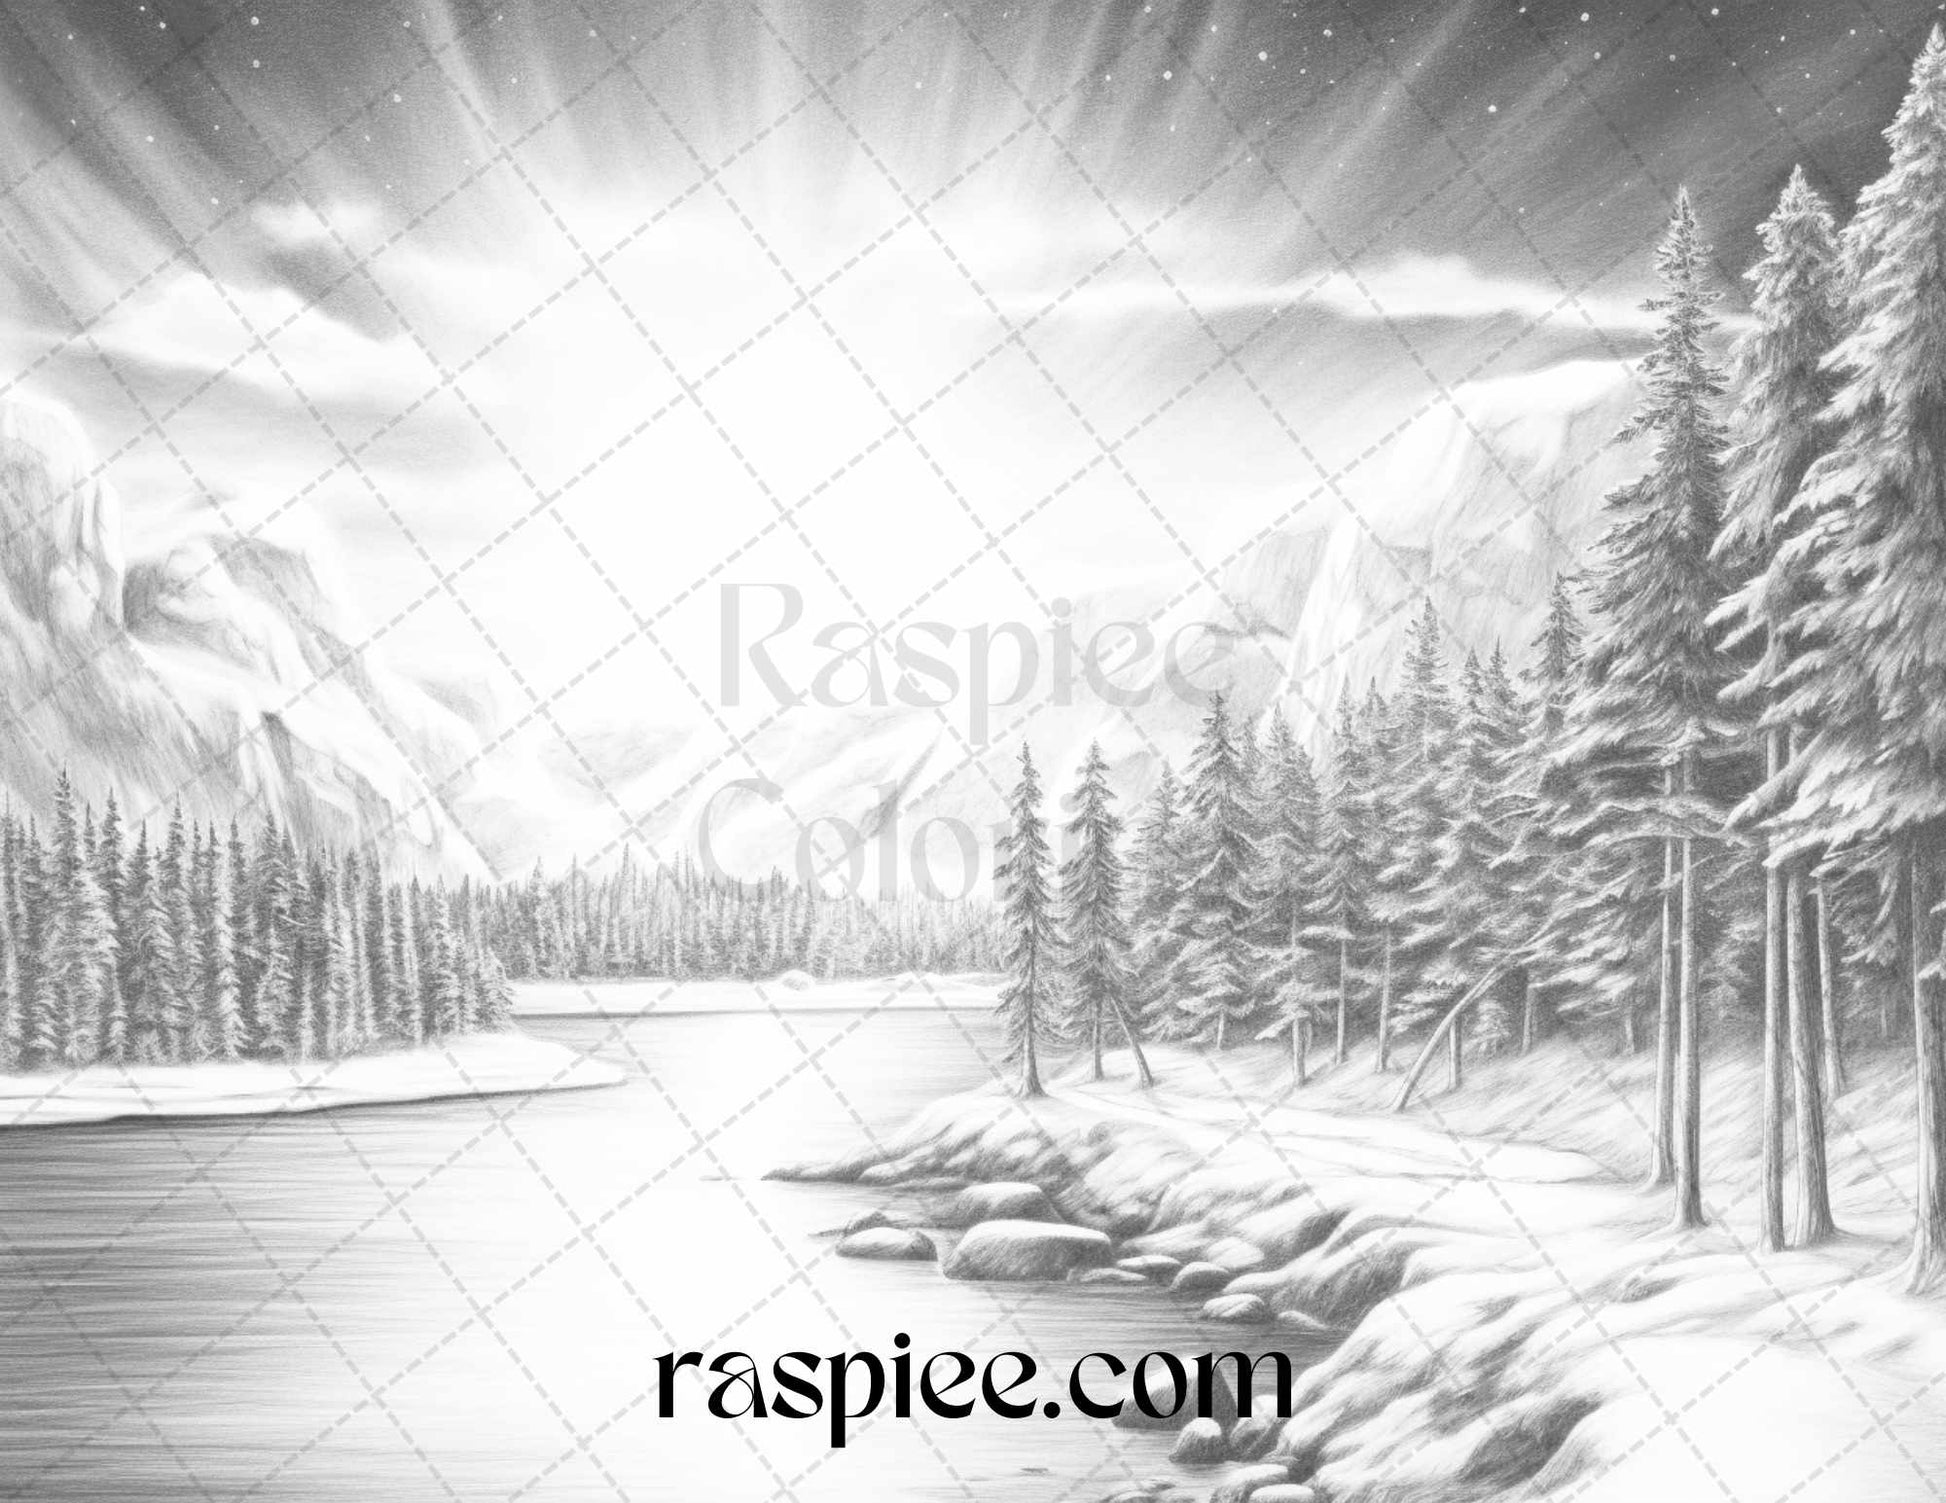 Aurora Borealis Landscape Coloring Page, Printable Adult Grayscale Coloring Sheet, Nordic Nature Scene Black and White Art, Relaxing Coloring Page for Adults, Digital Download Printable Coloring Book, Serene Winter Night Sky Coloring, Tranquil Scandinavian Grayscale Art